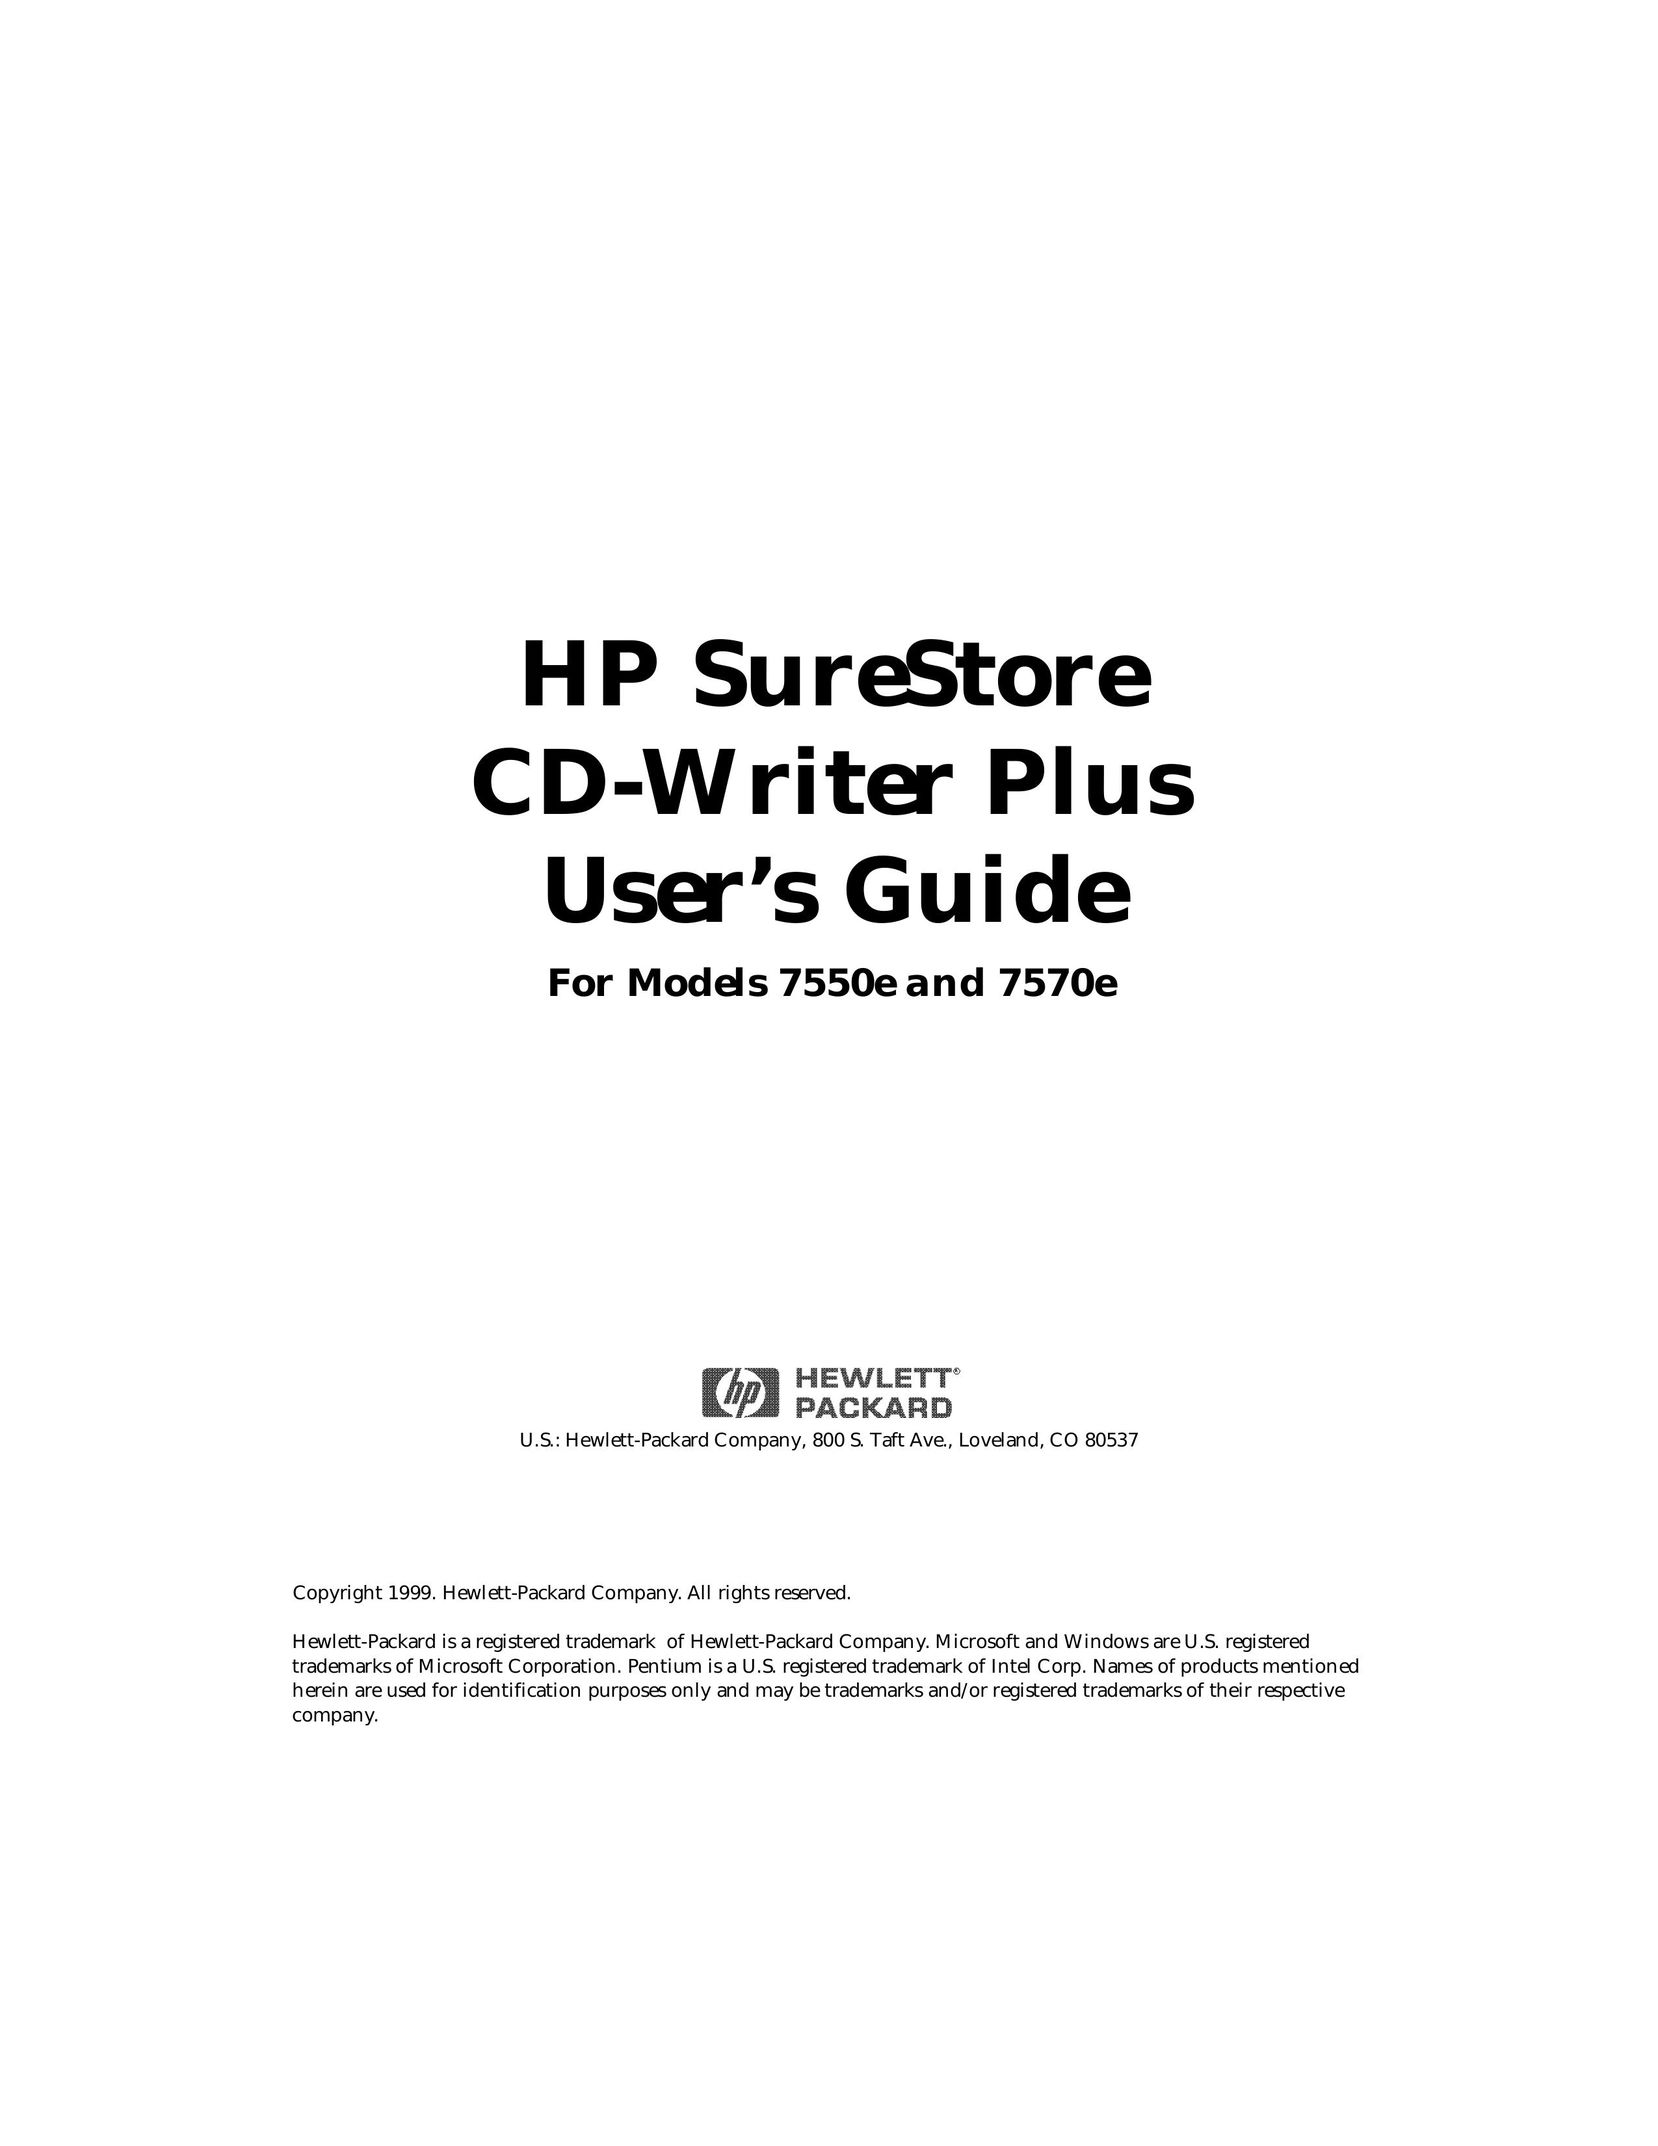 HP (Hewlett-Packard) 7550e Projection Television User Manual